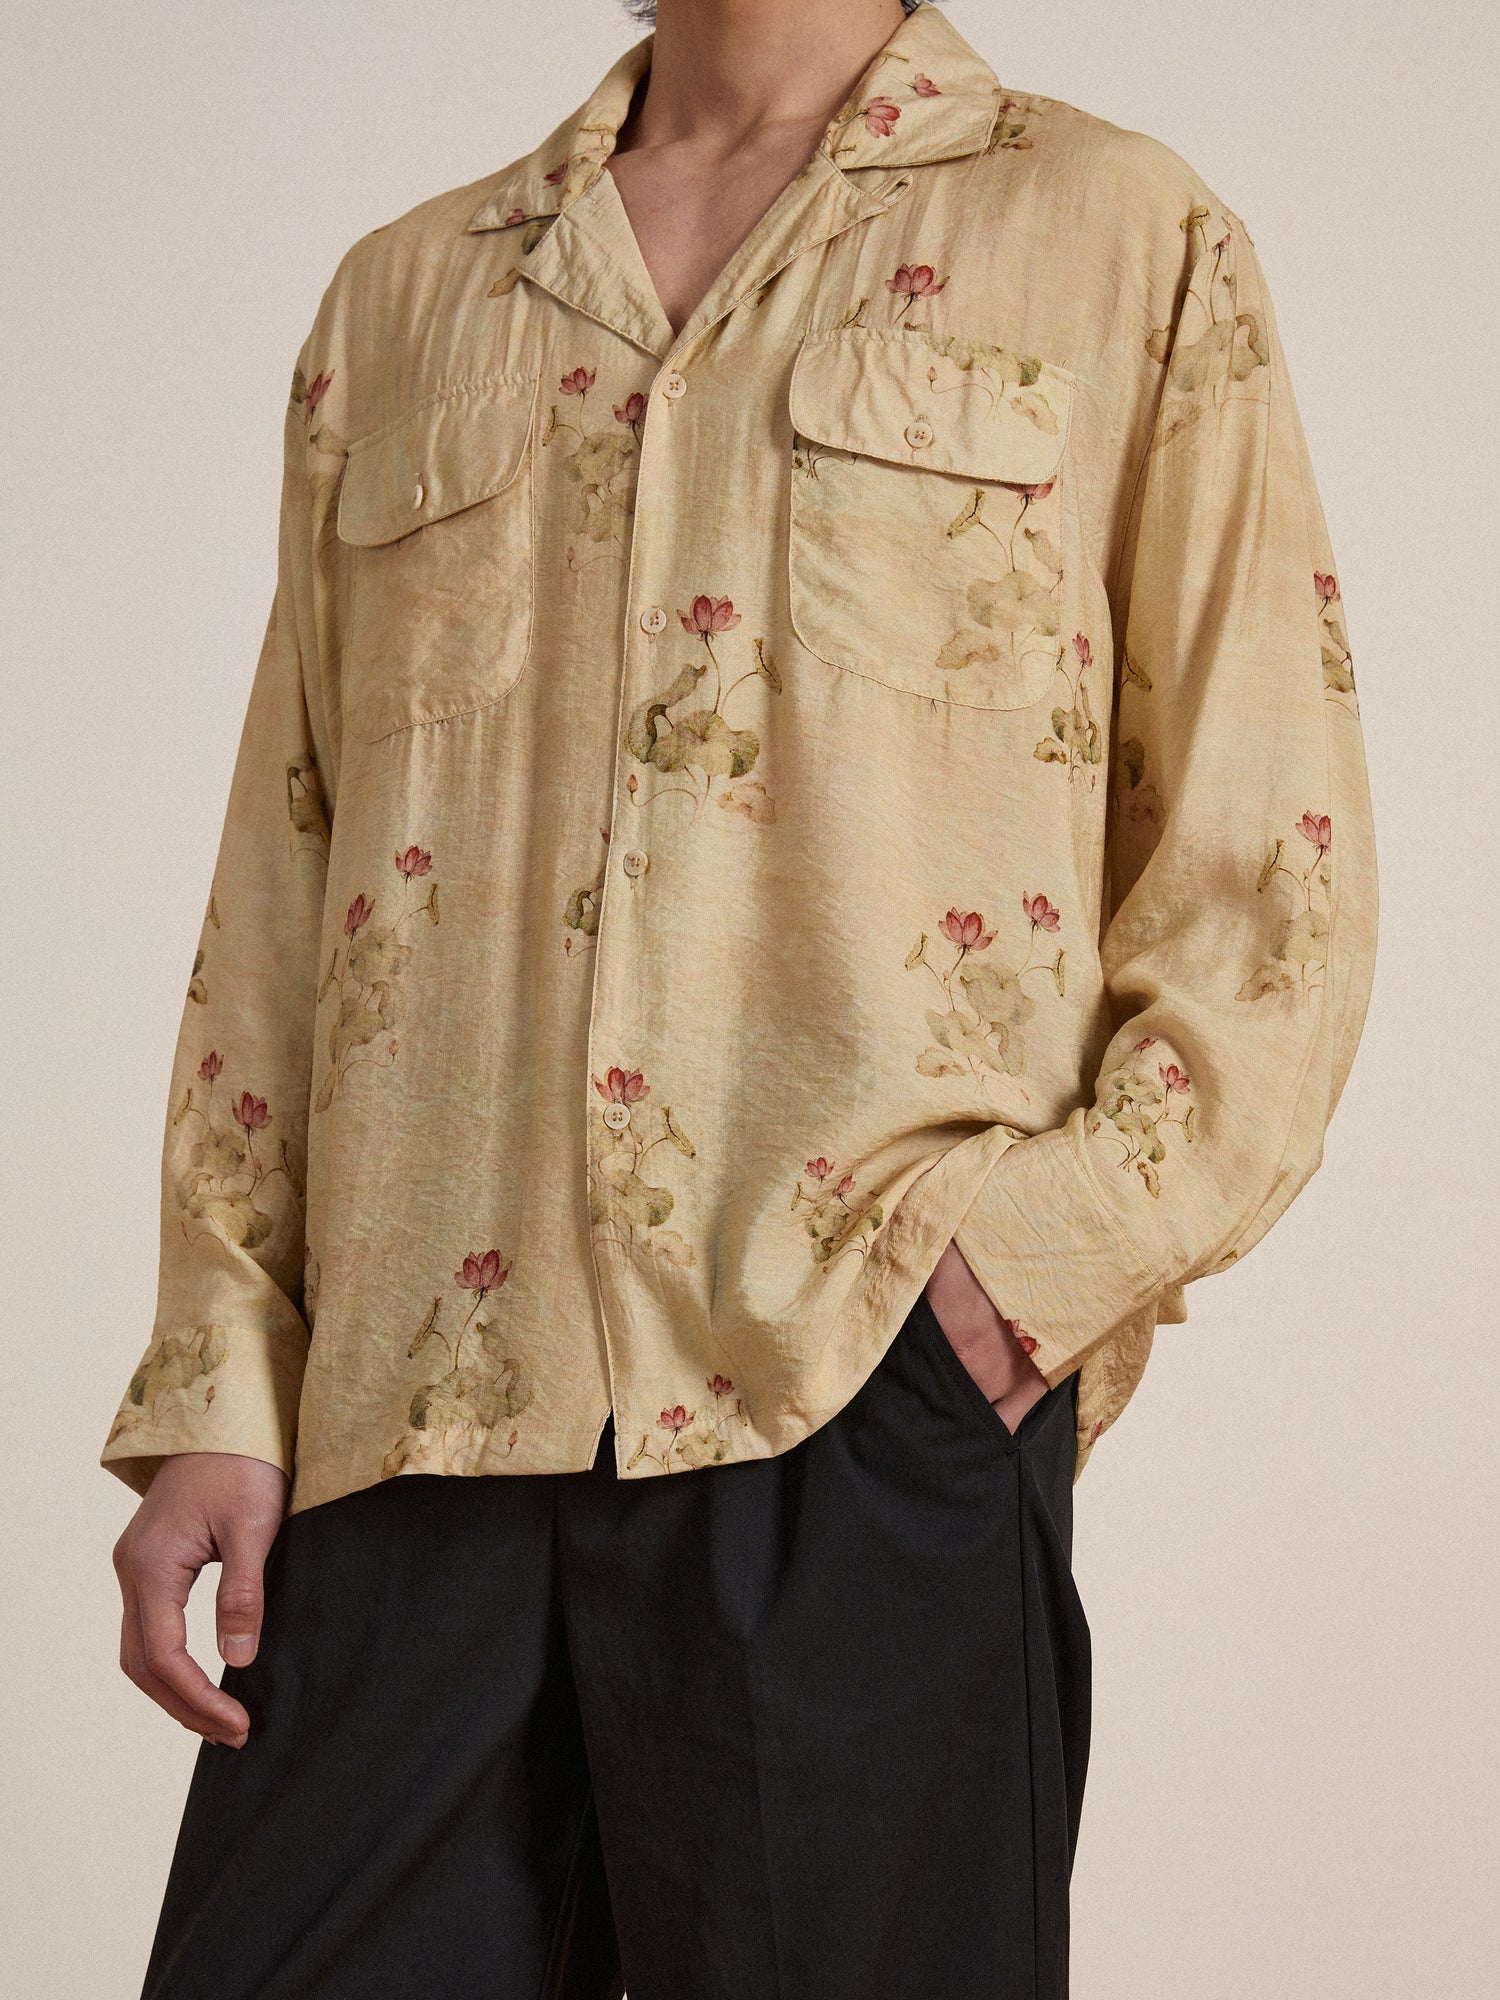 The model is wearing a Found Lotus LS Camp Shirt with floral print.